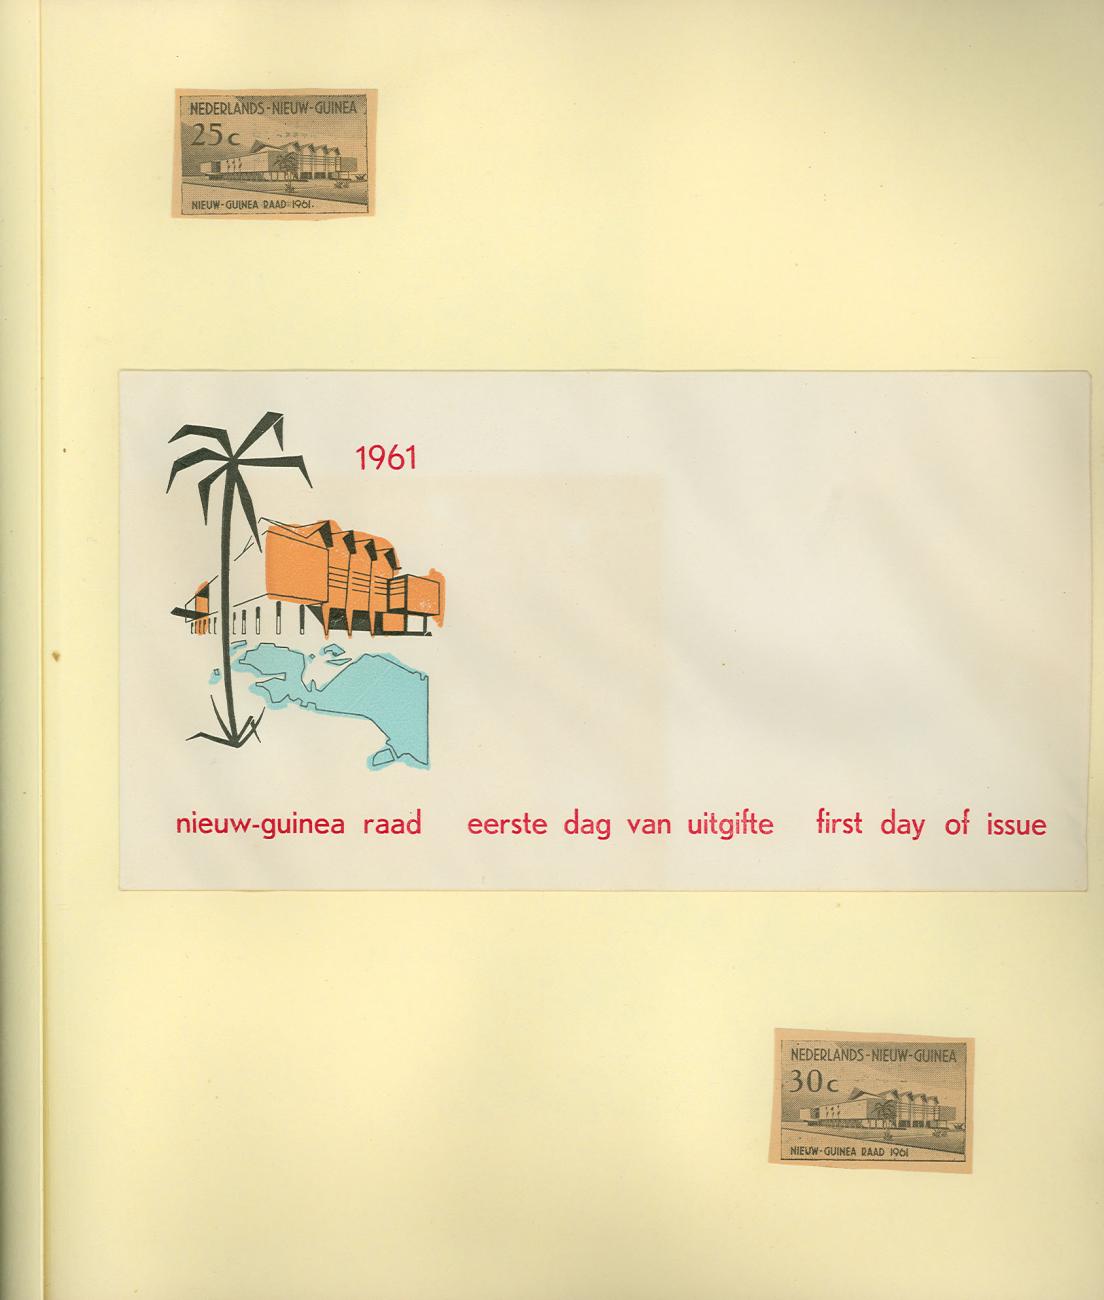 BD/83/27 - 
First day of issue stamps and envelope for the occasion of the New Guinea Council 1961
